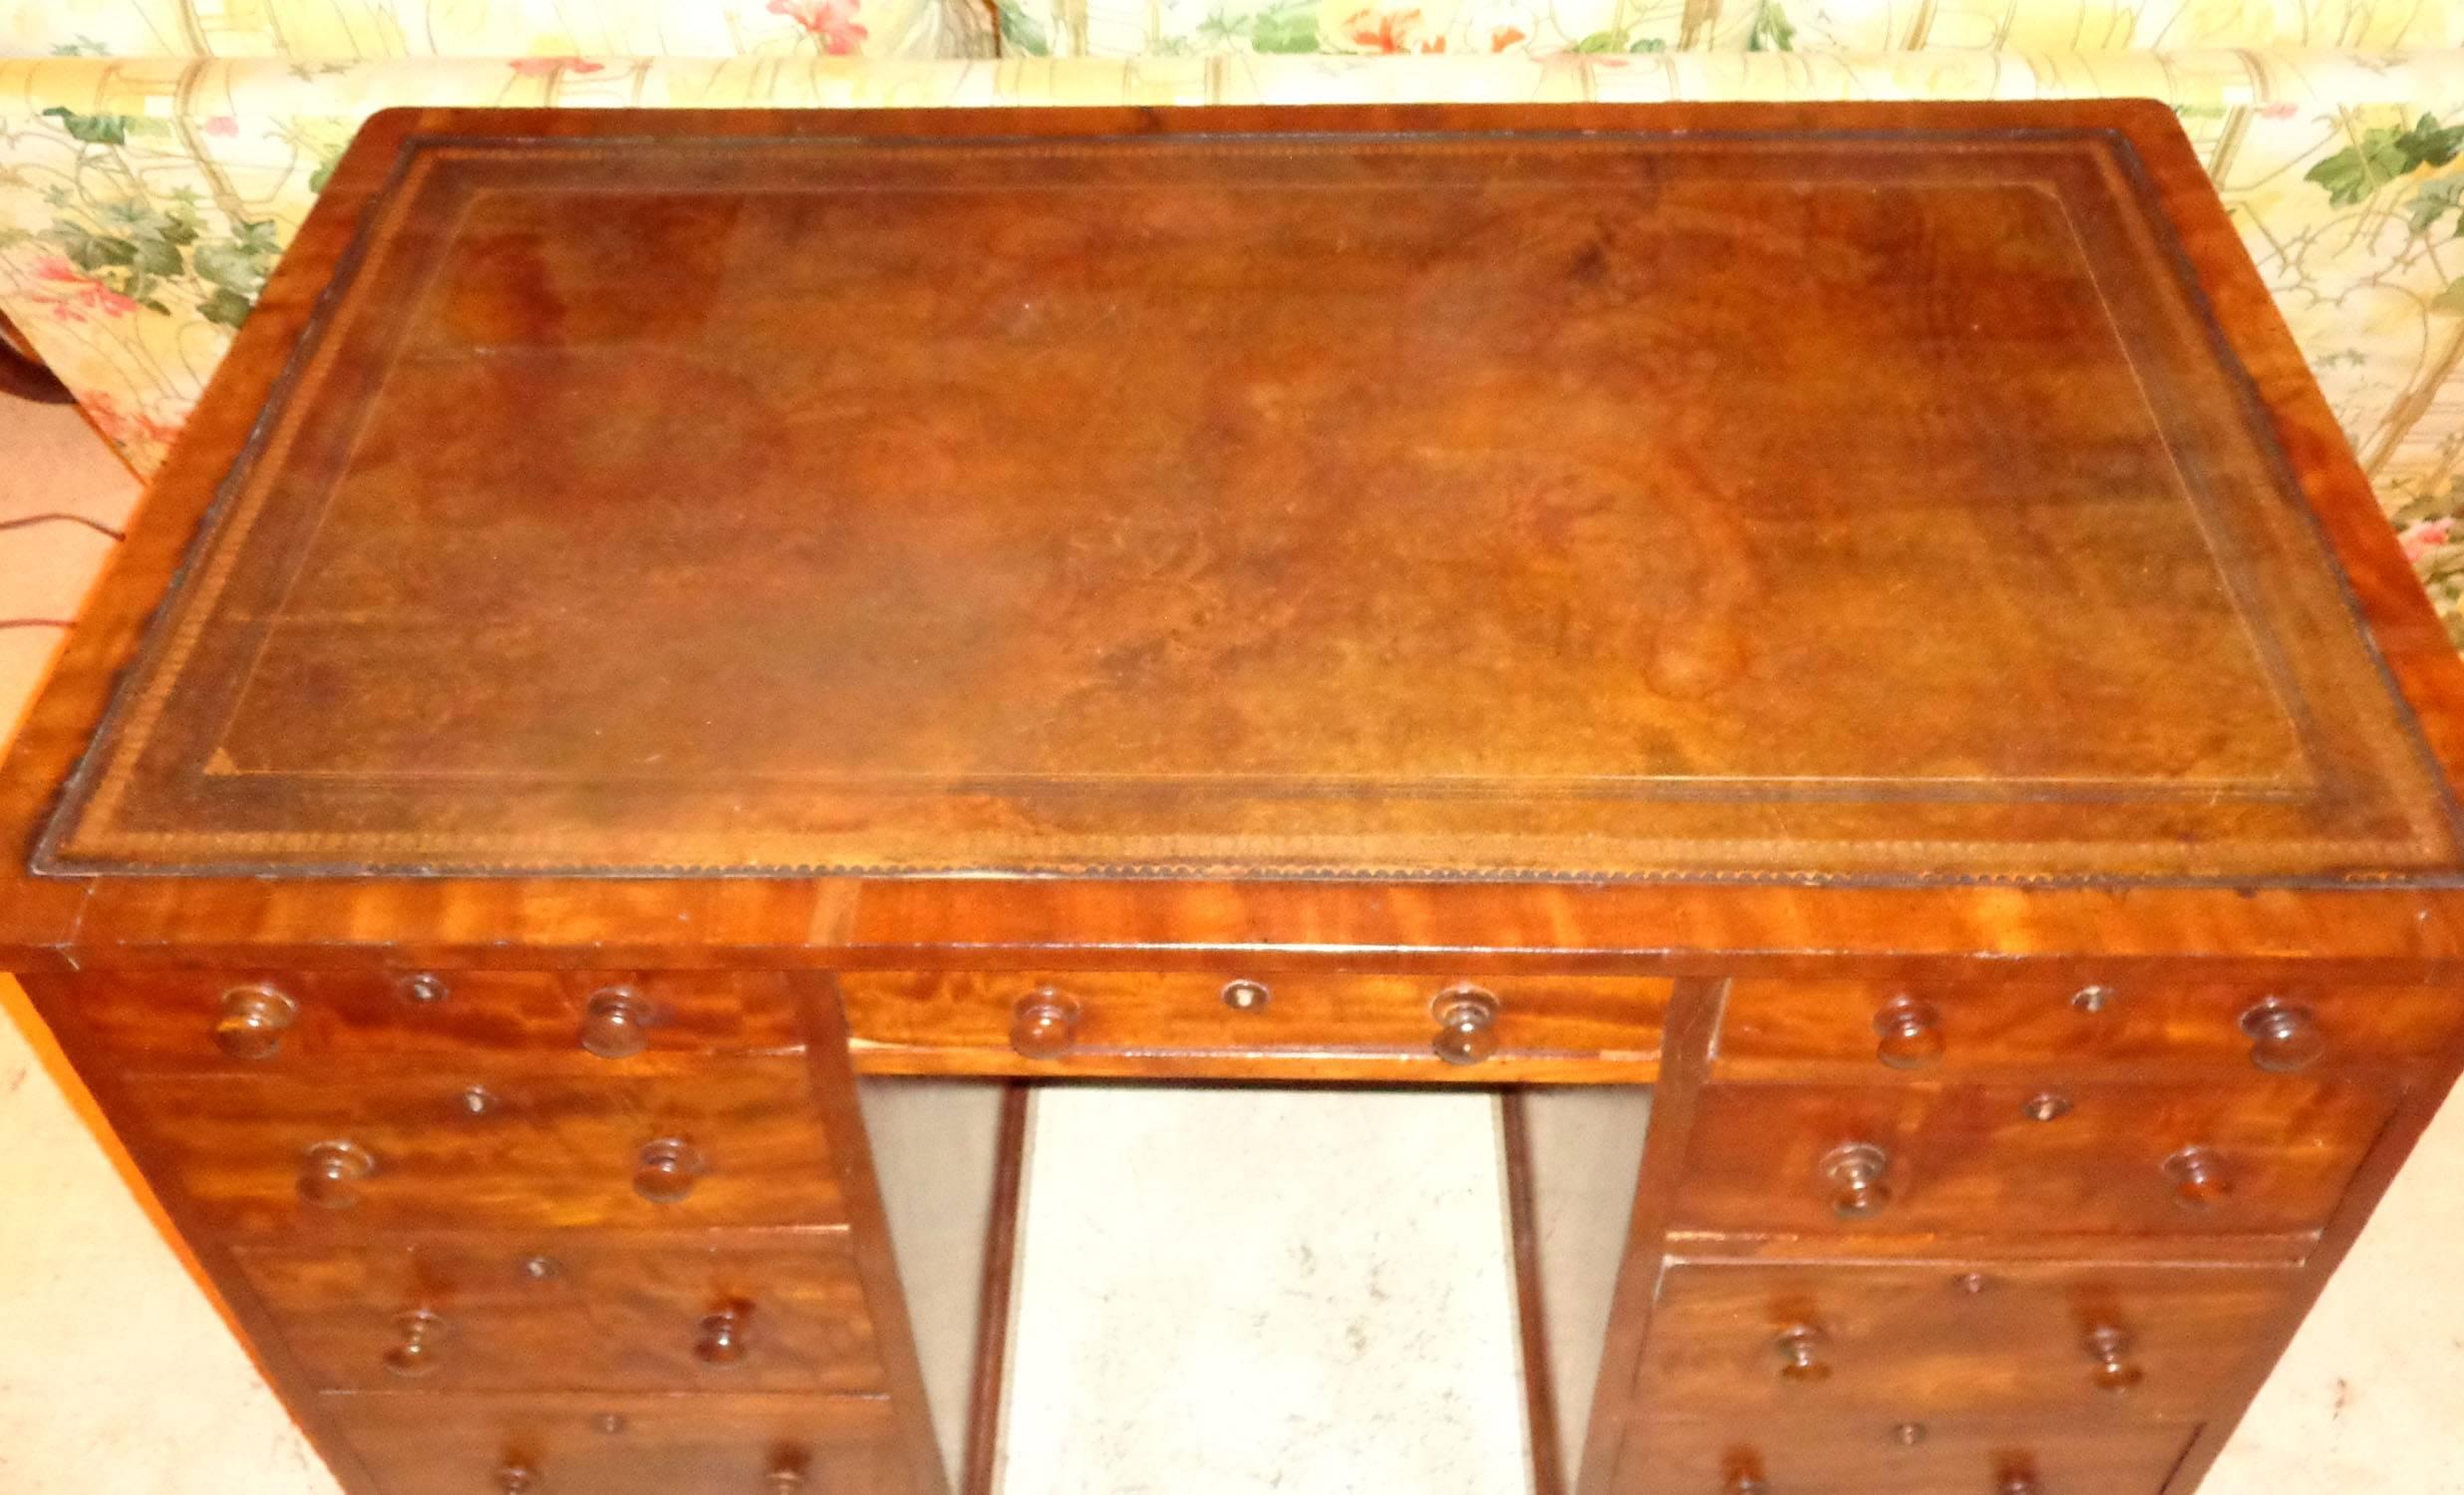 Rare English faded mahogany knee-hole map desk with original wooden knobs. Purchased from one of Europe's (Belgium) best known antiquarians and world renown designers, Axel Vervoordt. Formally in the Elizabeth Gertz collection.